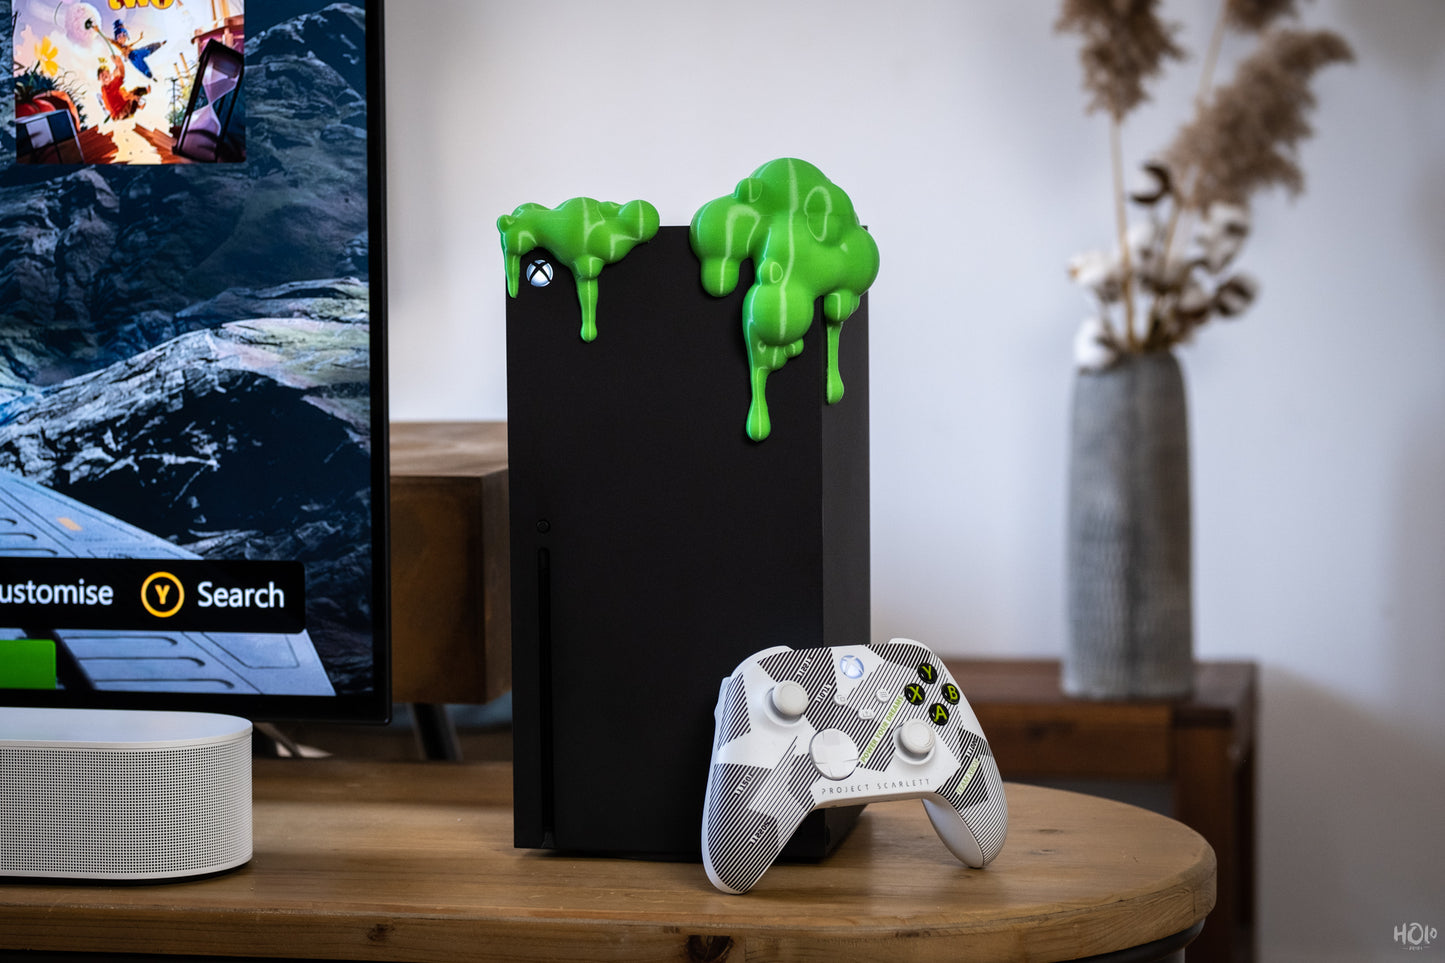 Slime Decor - Customize Your Console With Slime Blobs - Compatible with Xbox Series X